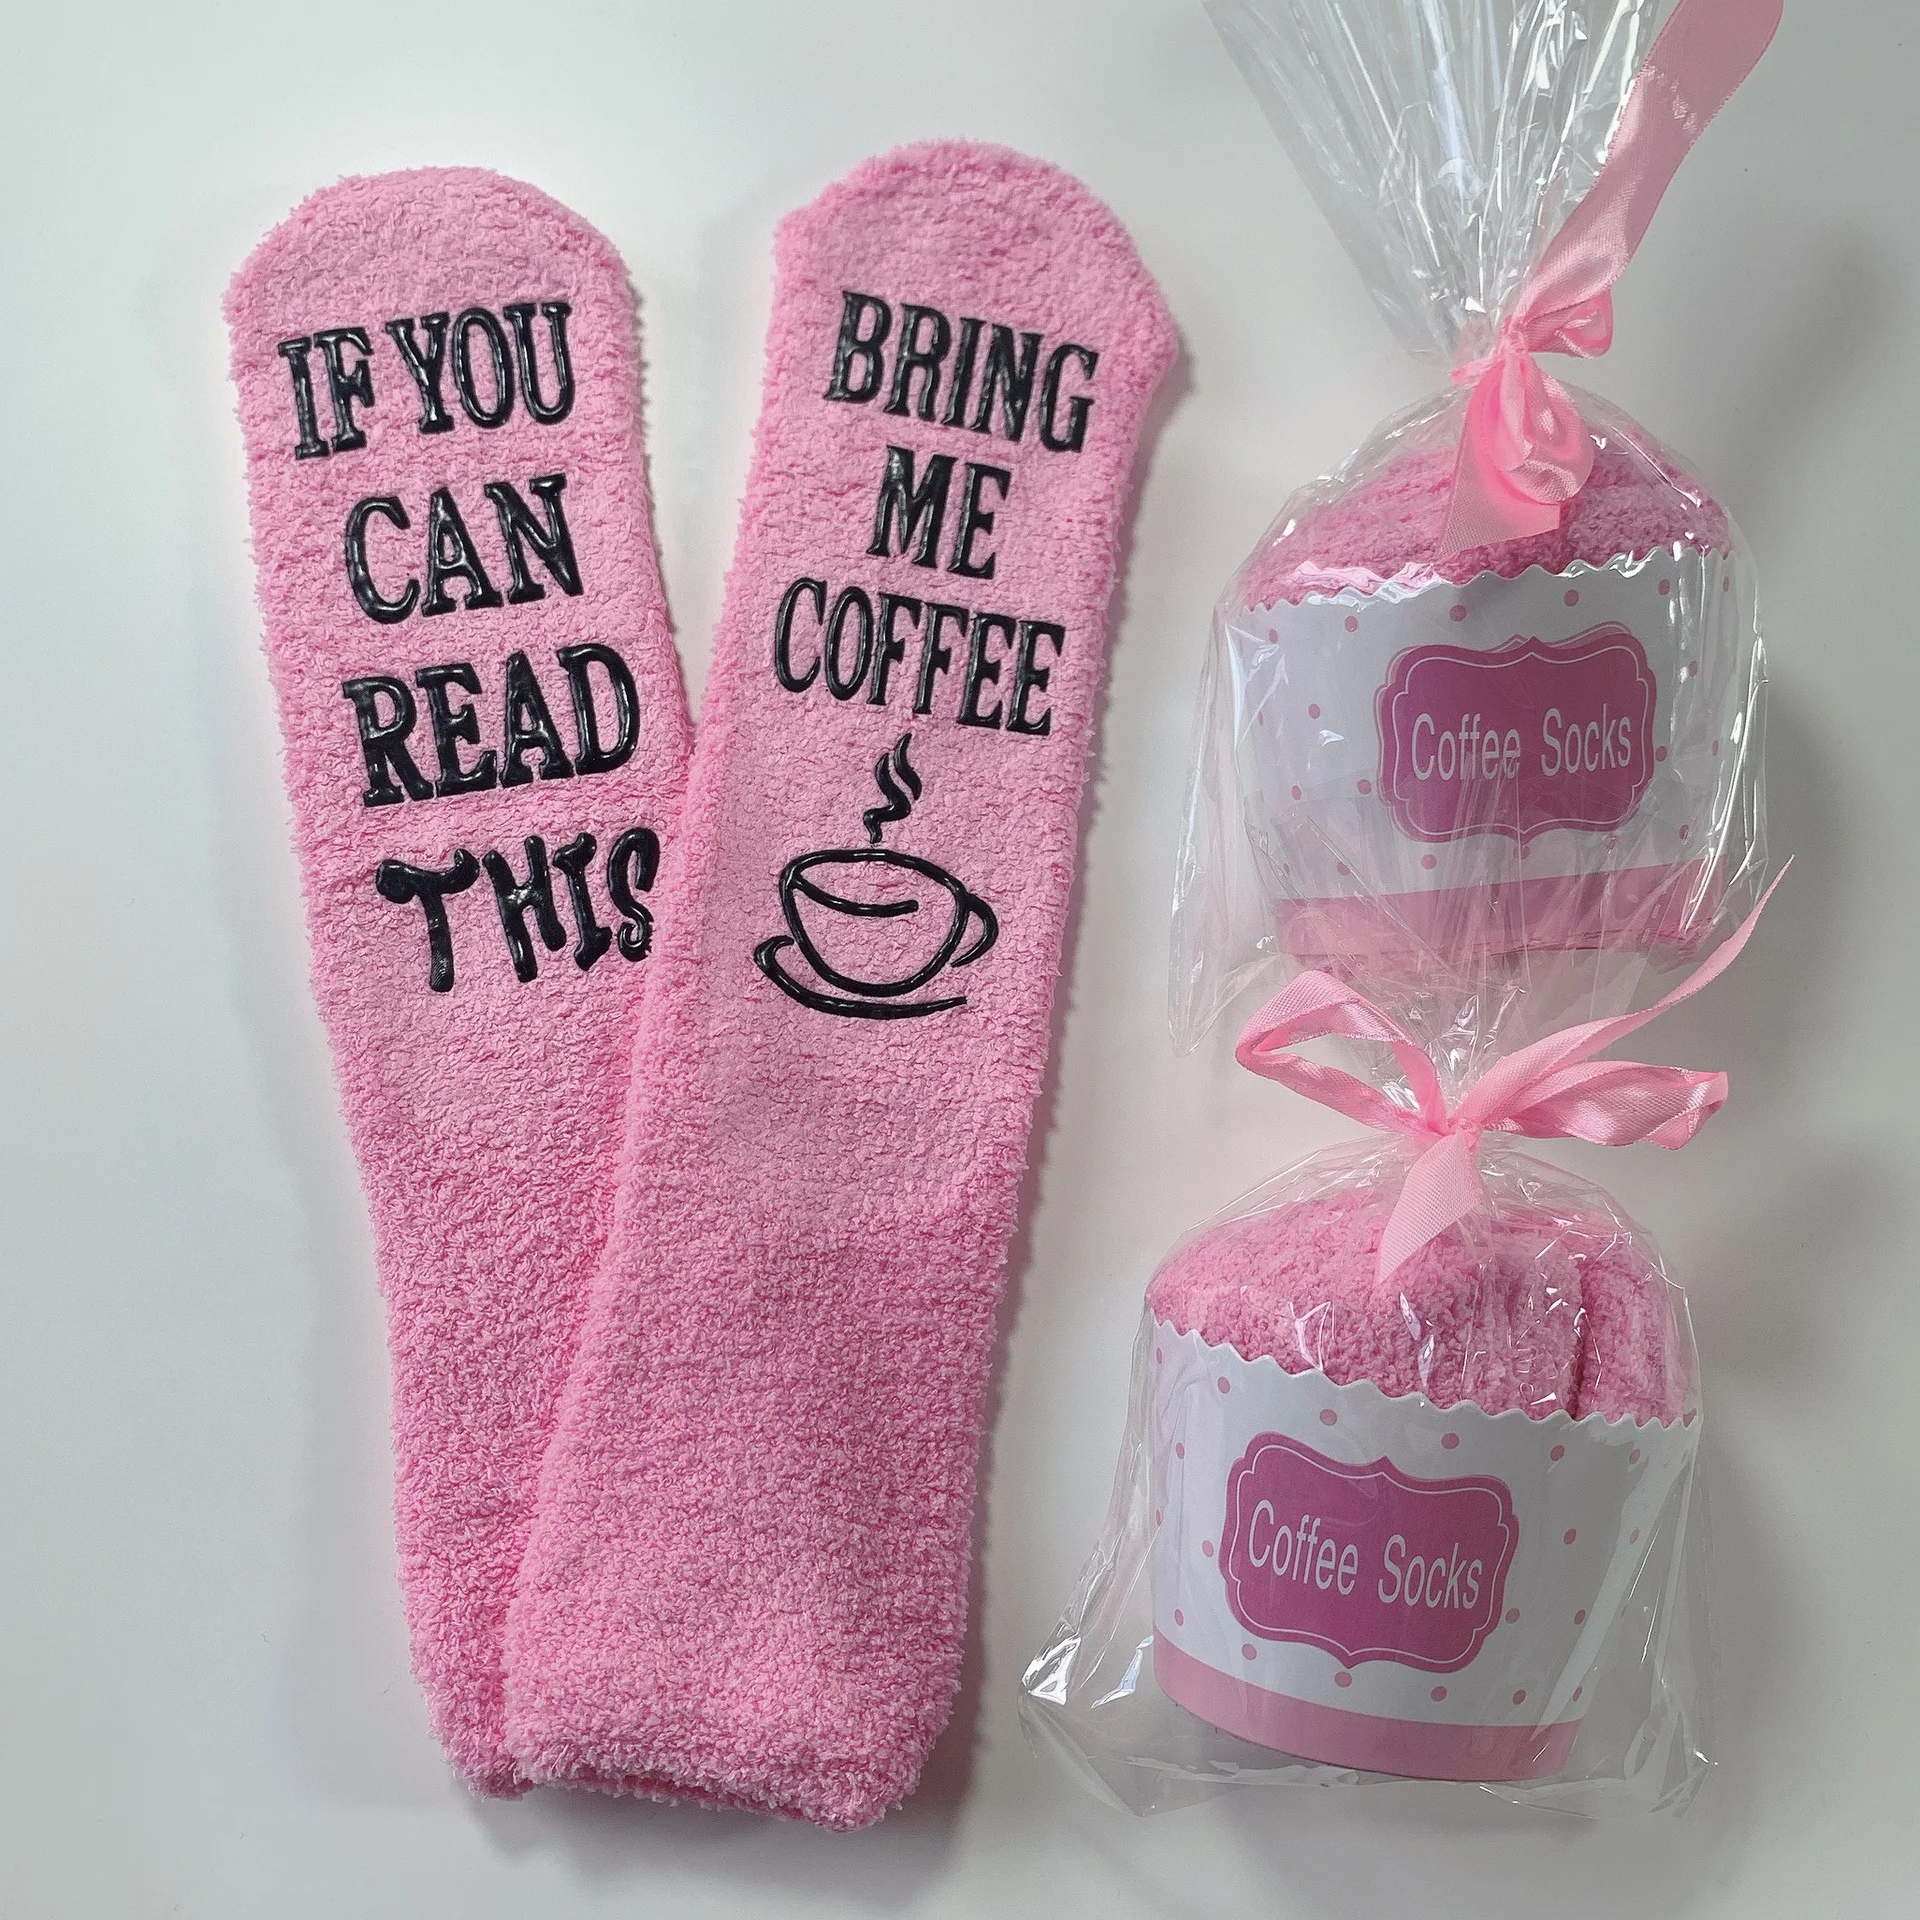 

XIANGHUI If You Can Read This Bring Me Some Wine Socks Pink Coral Velvet Cupcake Socks Fuzzy Socks for Women as Gift